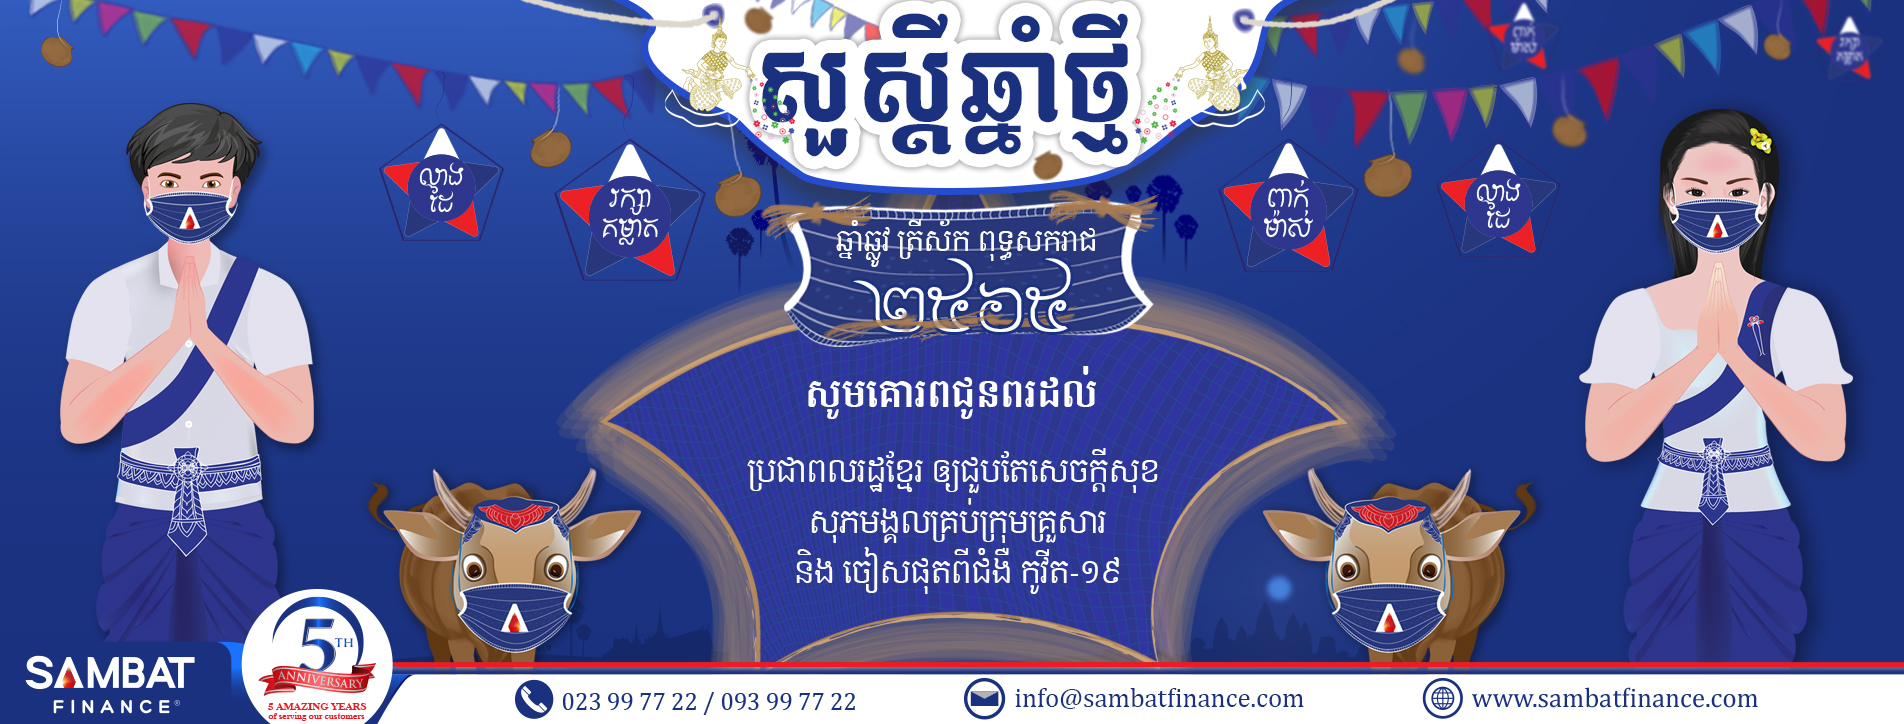 KHMER NEW YEAR MESSAGE